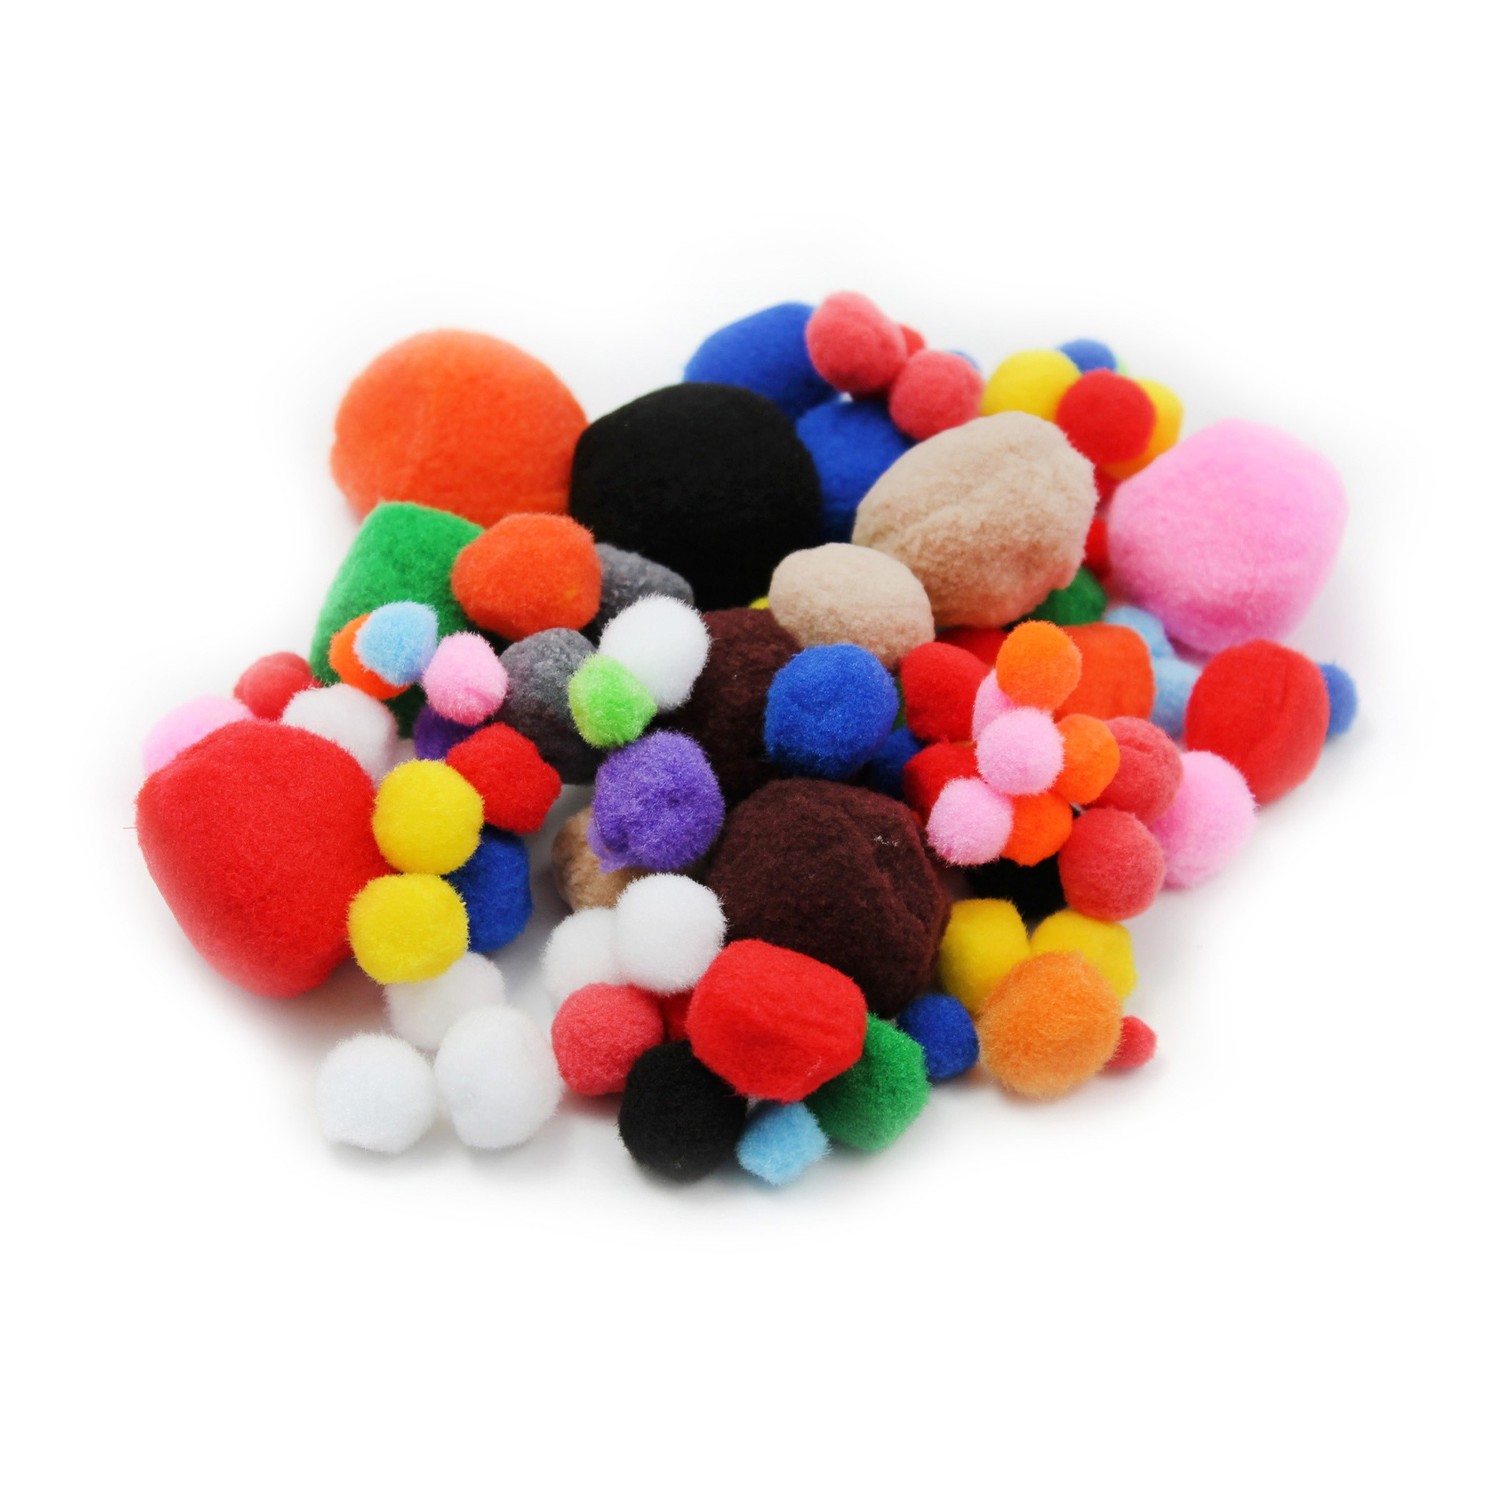 Creative Arts Pom-Poms, Assorted Sizes/Colors, Bag of 100